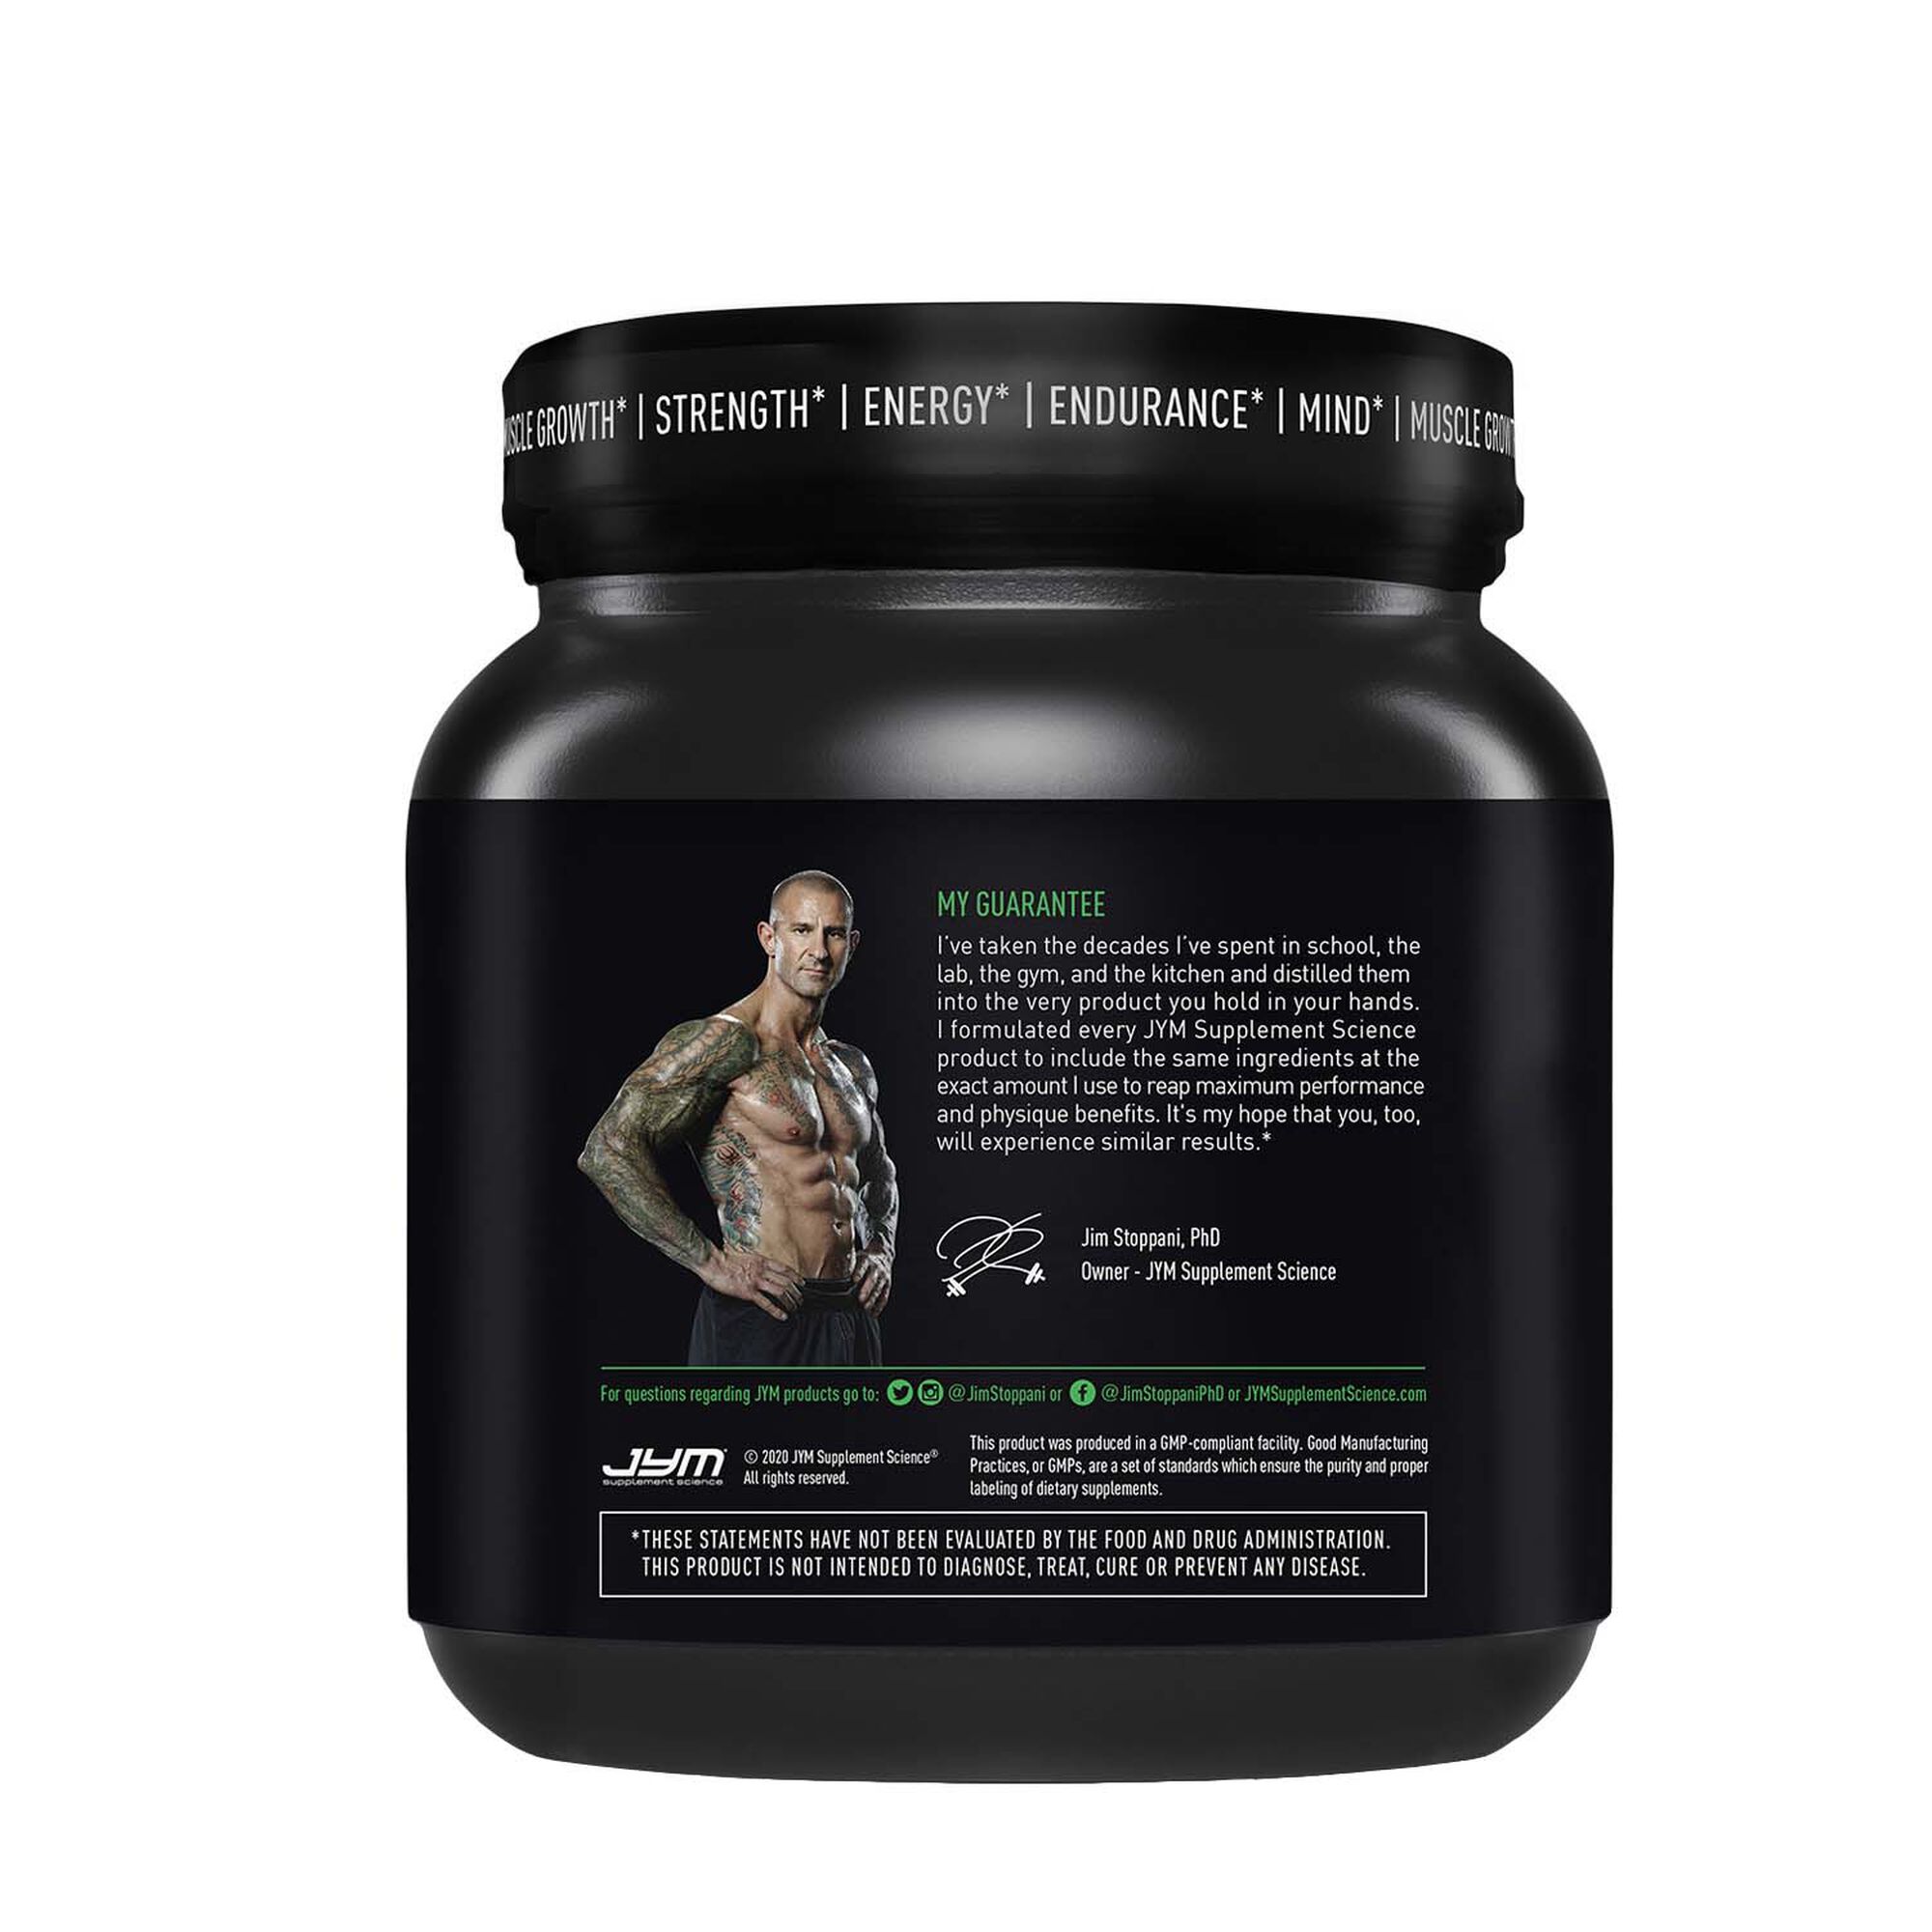 Simple Jym pre workout best flavor for Build Muscle